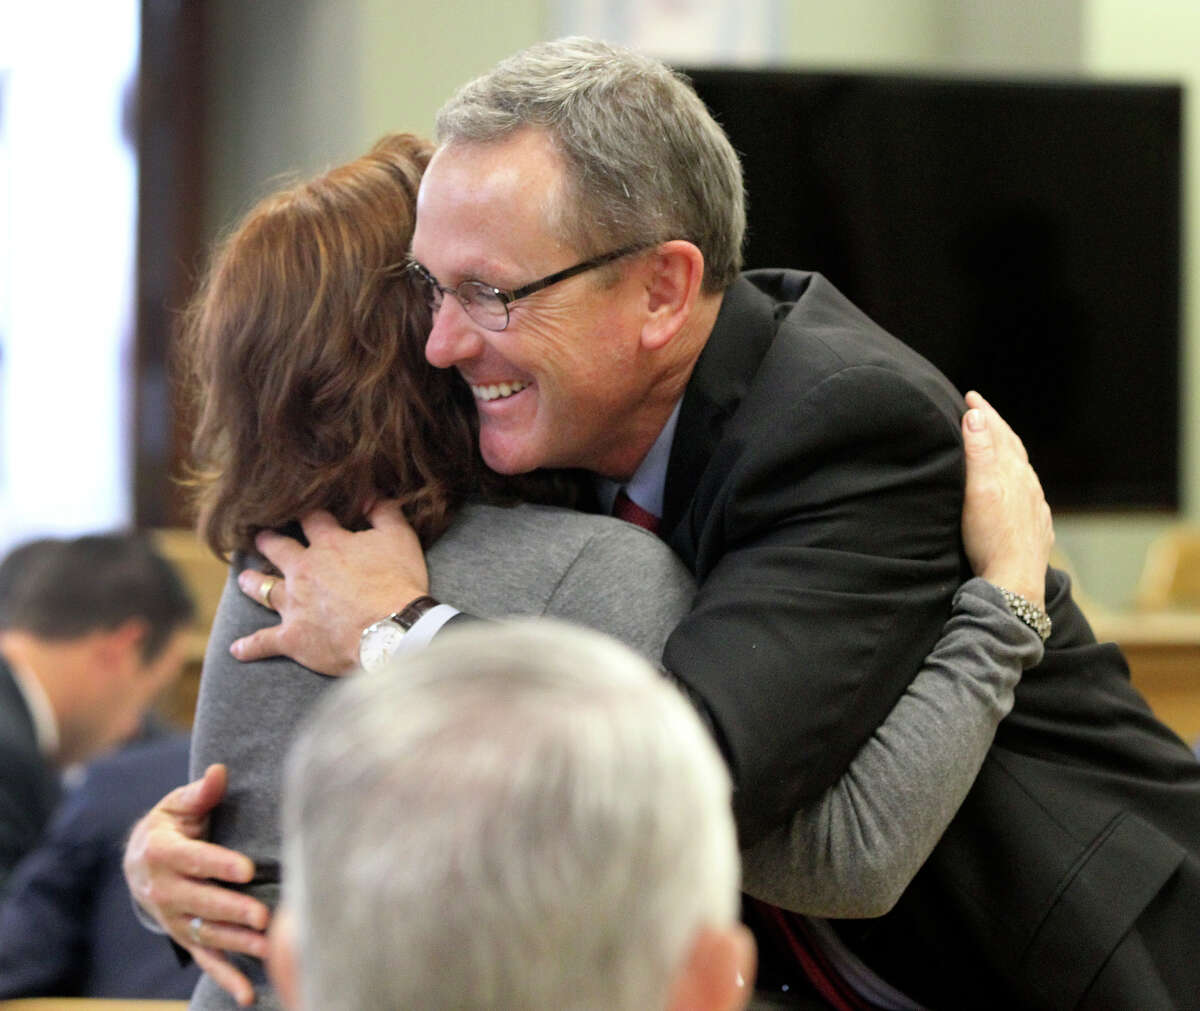 Attorney Mike McCrum (right) gets a hug from a supporter Monday November 17, 2014 in the 225th District Court at the Bexar County Courthouse during a contempt of court hearing. McCrum, serving as a special prosecutor in the case against Gov. Rick Perry, who is also accused of professional misconduct, could spend up to six months in jail if found guilty in contempt. After nearly a nine-month hiatus, the hearing resumed for McCrum.